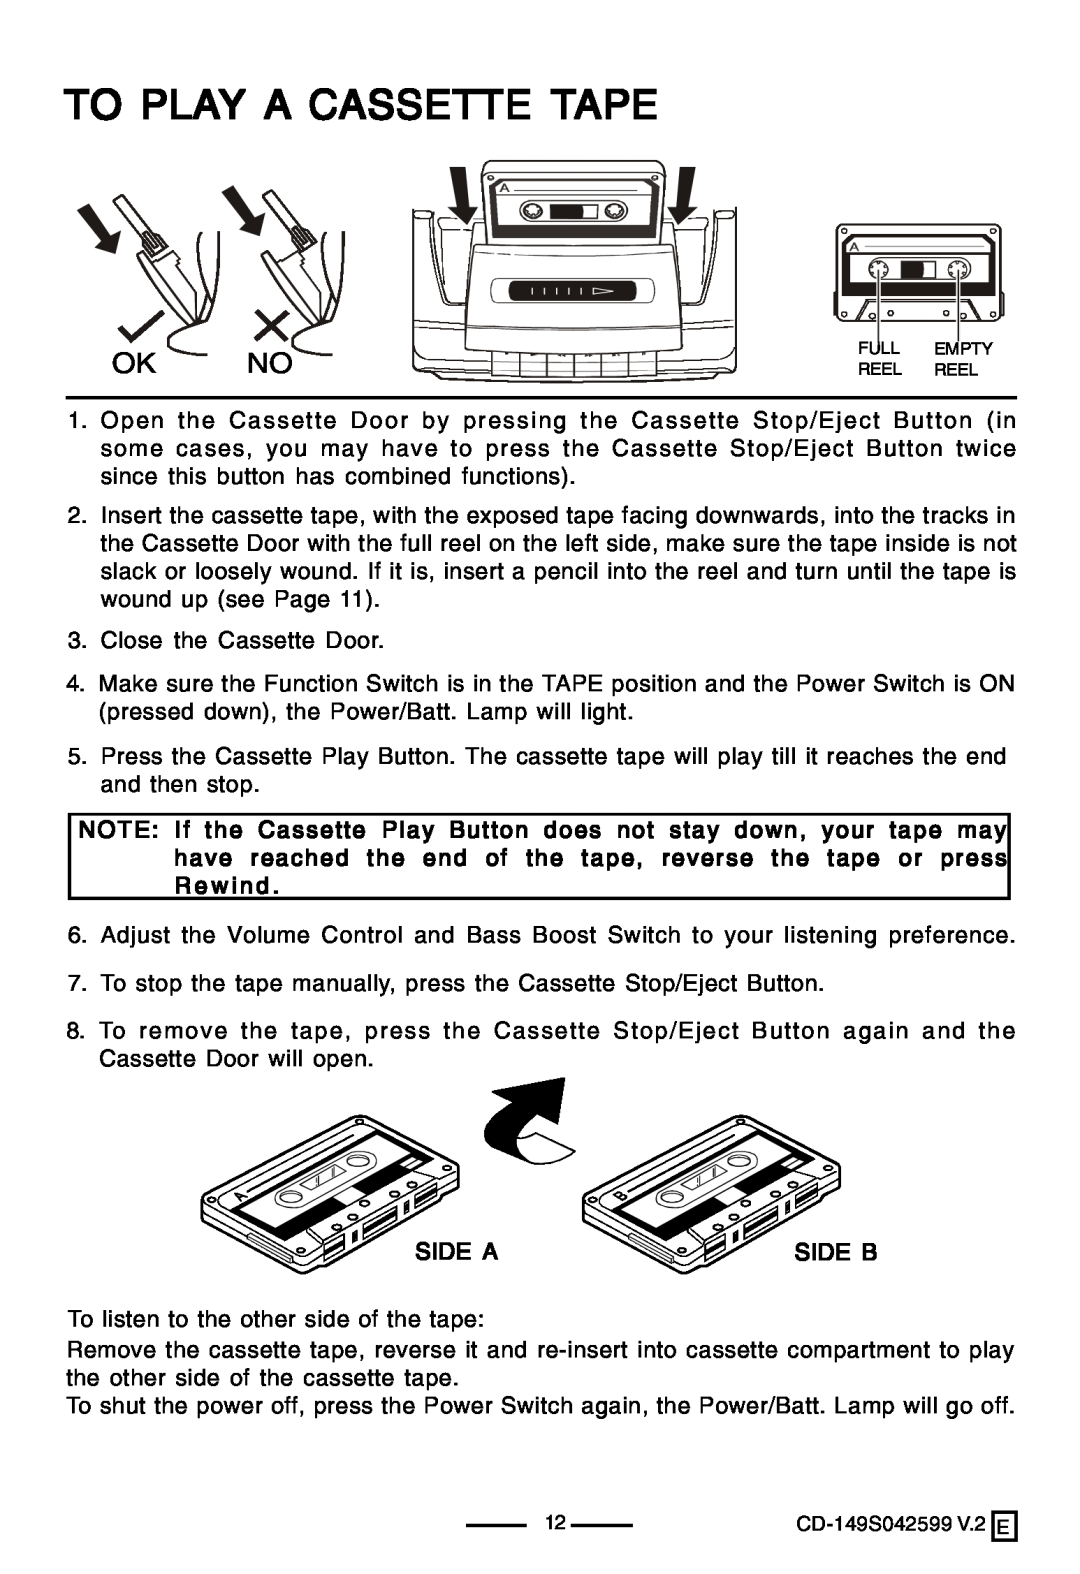 Lenoxx Electronics CD-149 operating instructions To Play A Cassette Tape, Ok No, Side A, Side B 